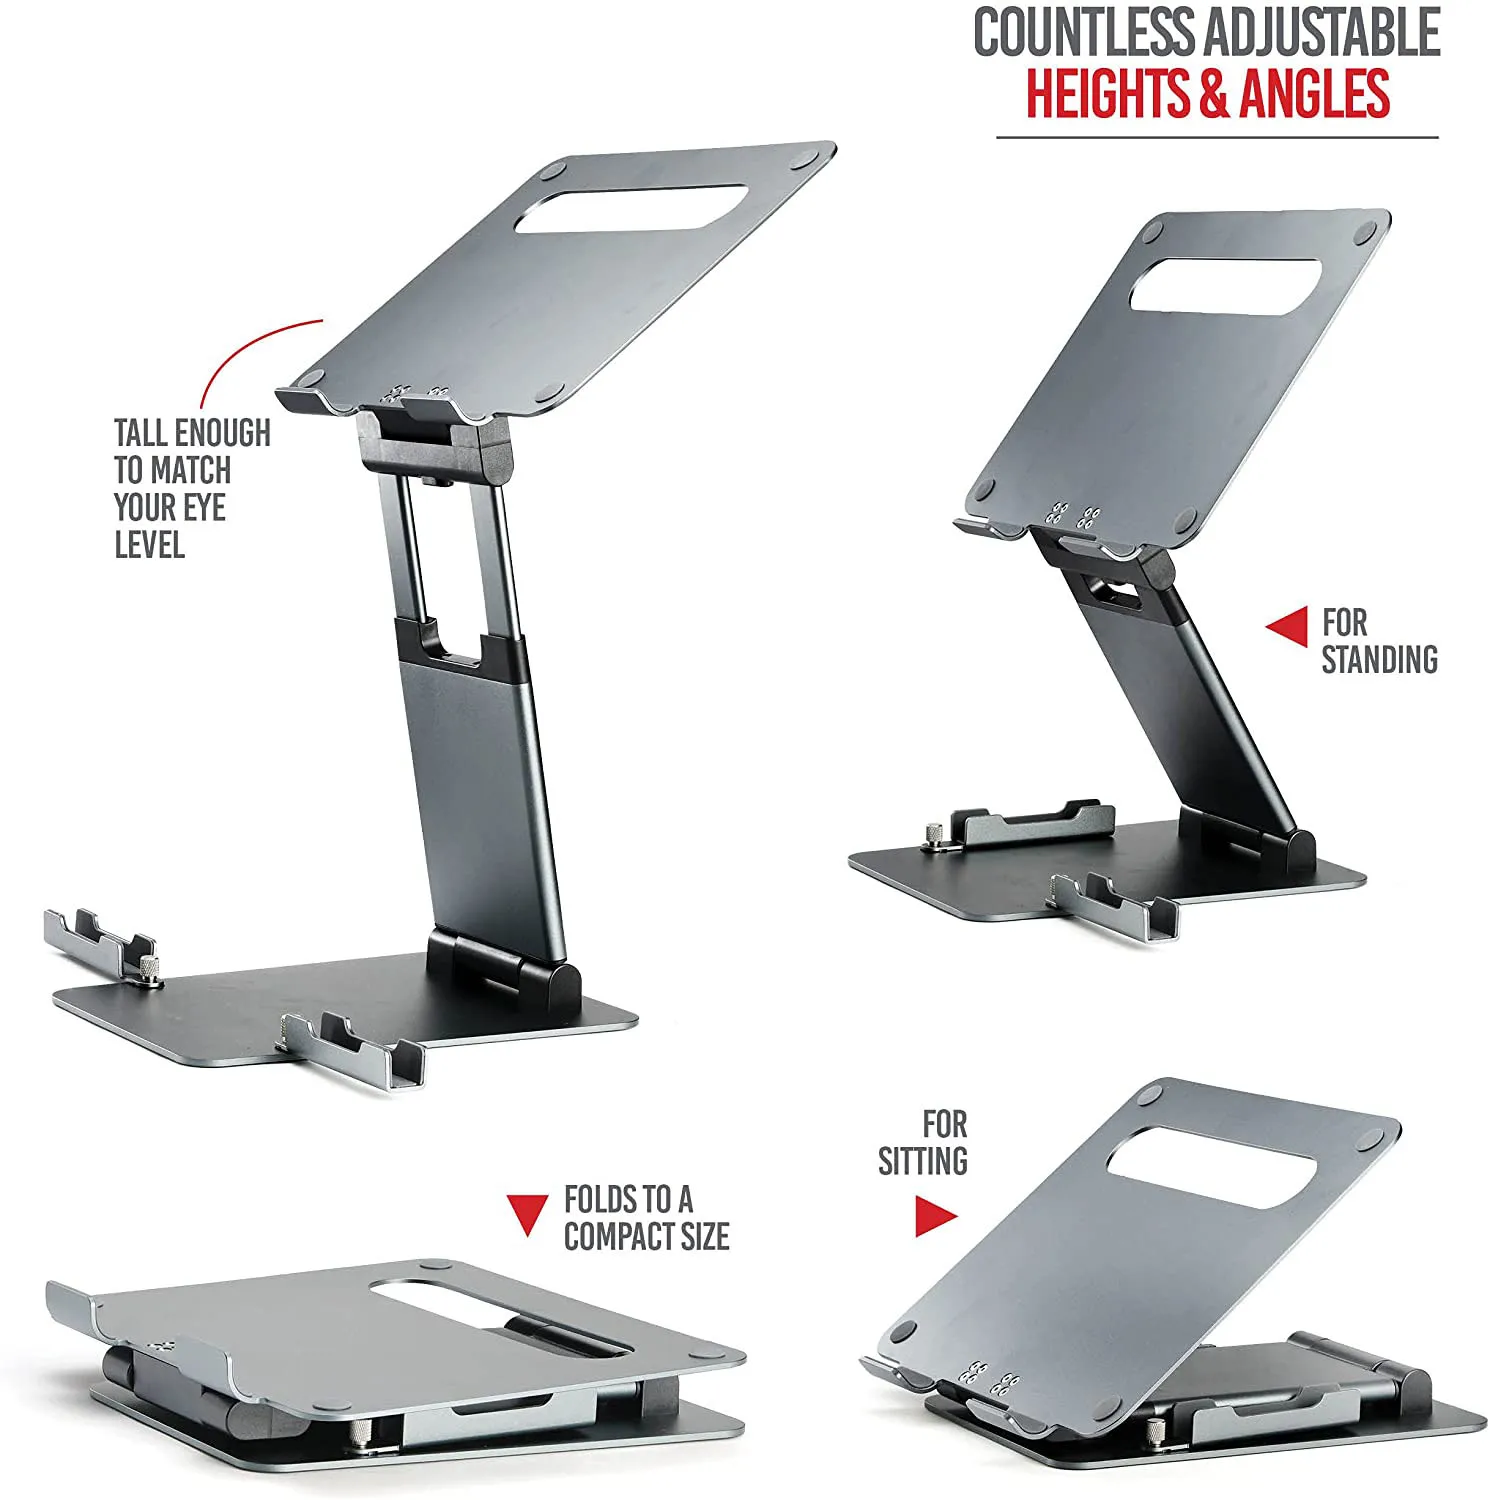 Ergonomic Adjustable height up to 20" laptop stand for desk Portable laptop riser with Phone Holder